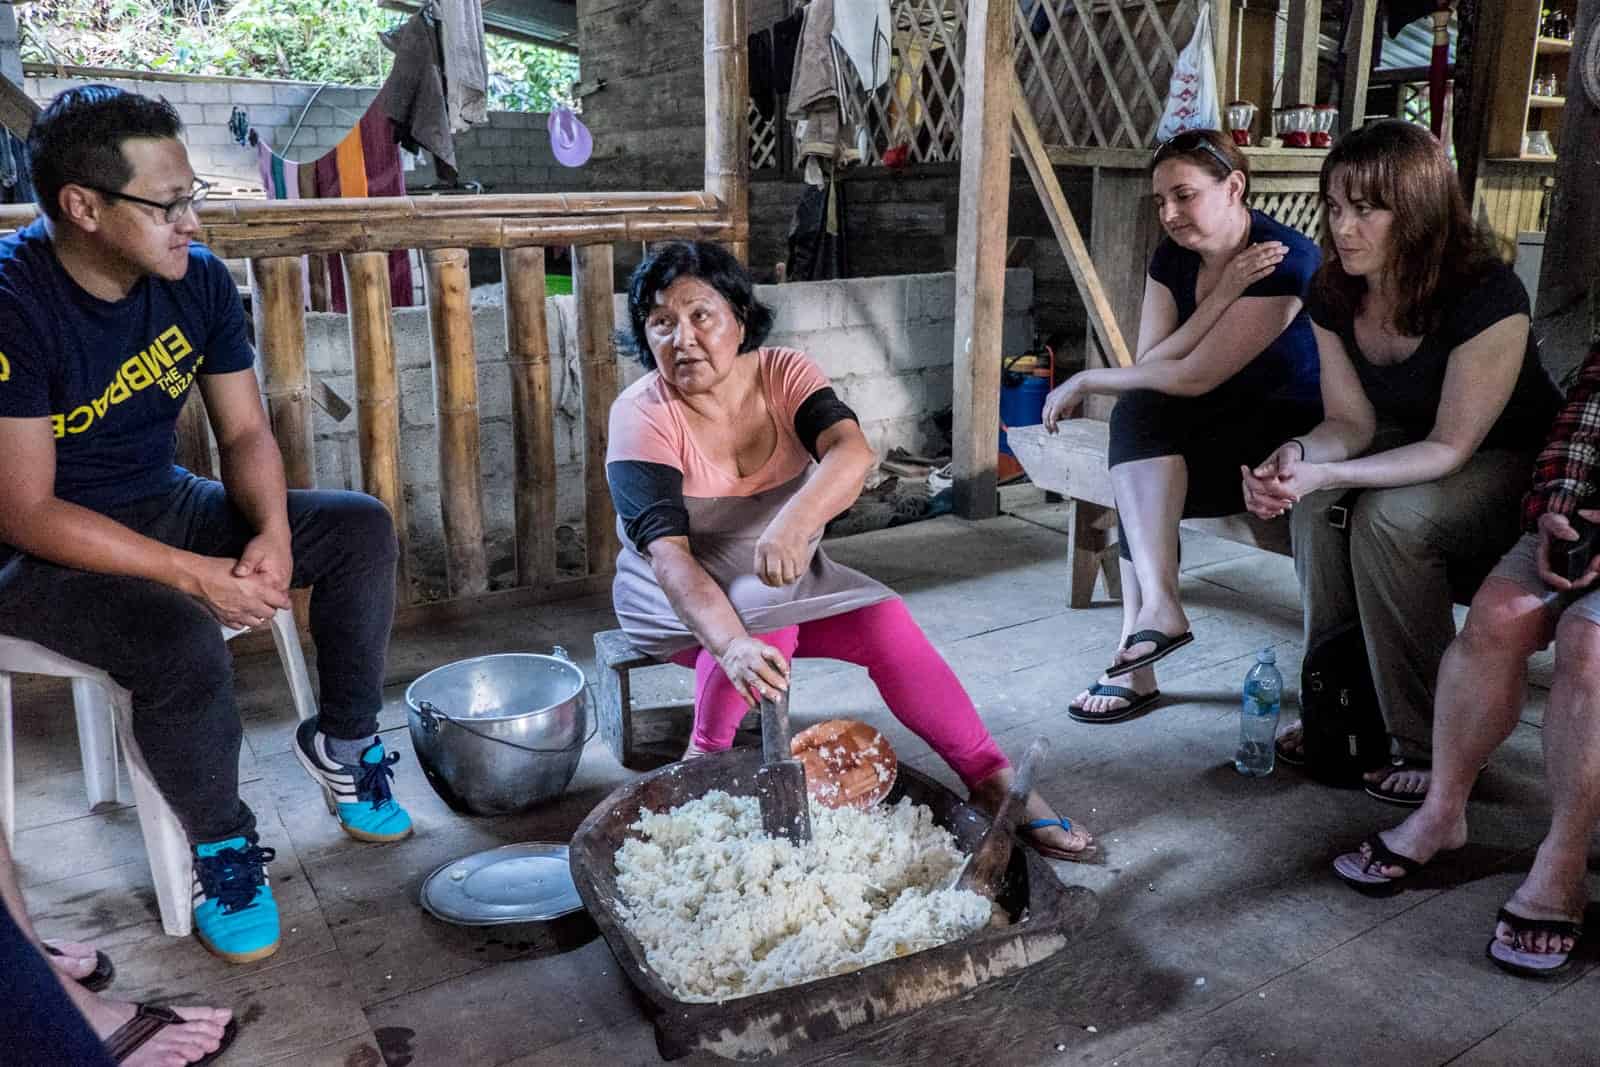 An Ecuadorian woman sitting on a wooden stall in a local house, stirs a thick, flour-like substance known as Chica, while travellers look on and learn. 